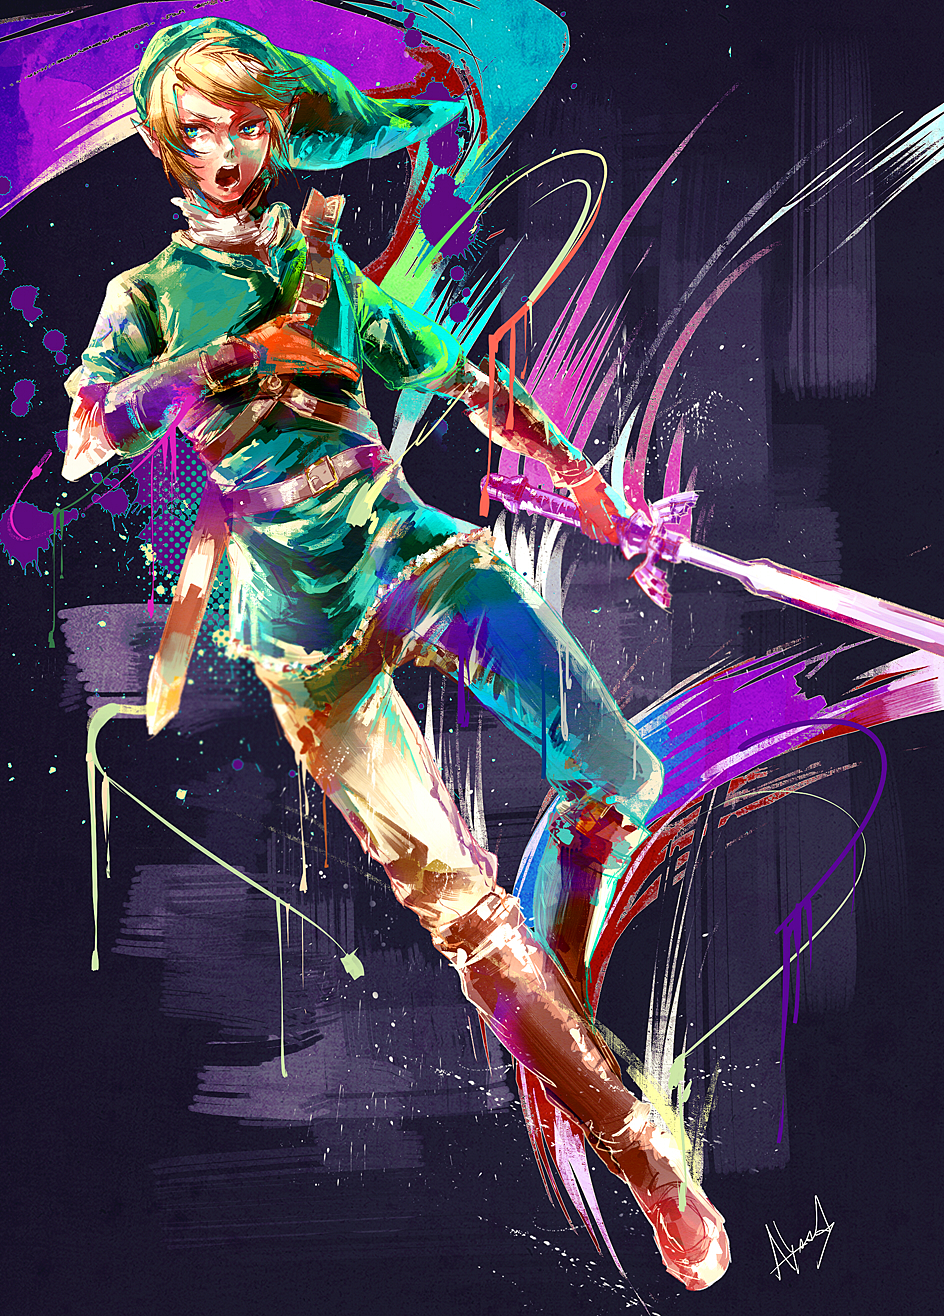 1boy abstract_background alyssa718 alyssa_(pixiv1037889) aqua_eyes artist_signature belt belt_buckle boots brown_shoes buckles chainmail fighting_stance full_body green_hat green_headwear green_outerwear hat holding_weapon hylian knee_boots link looking_to_side male_focus master_sword open_mouth pointy_ears pointy_hat scabbard sheath short_sleeves solo splatter sword the_legend_of_zelda the_legend_of_zelda:_twilight_princess tunic turtleneck undershirt vambraces weapon